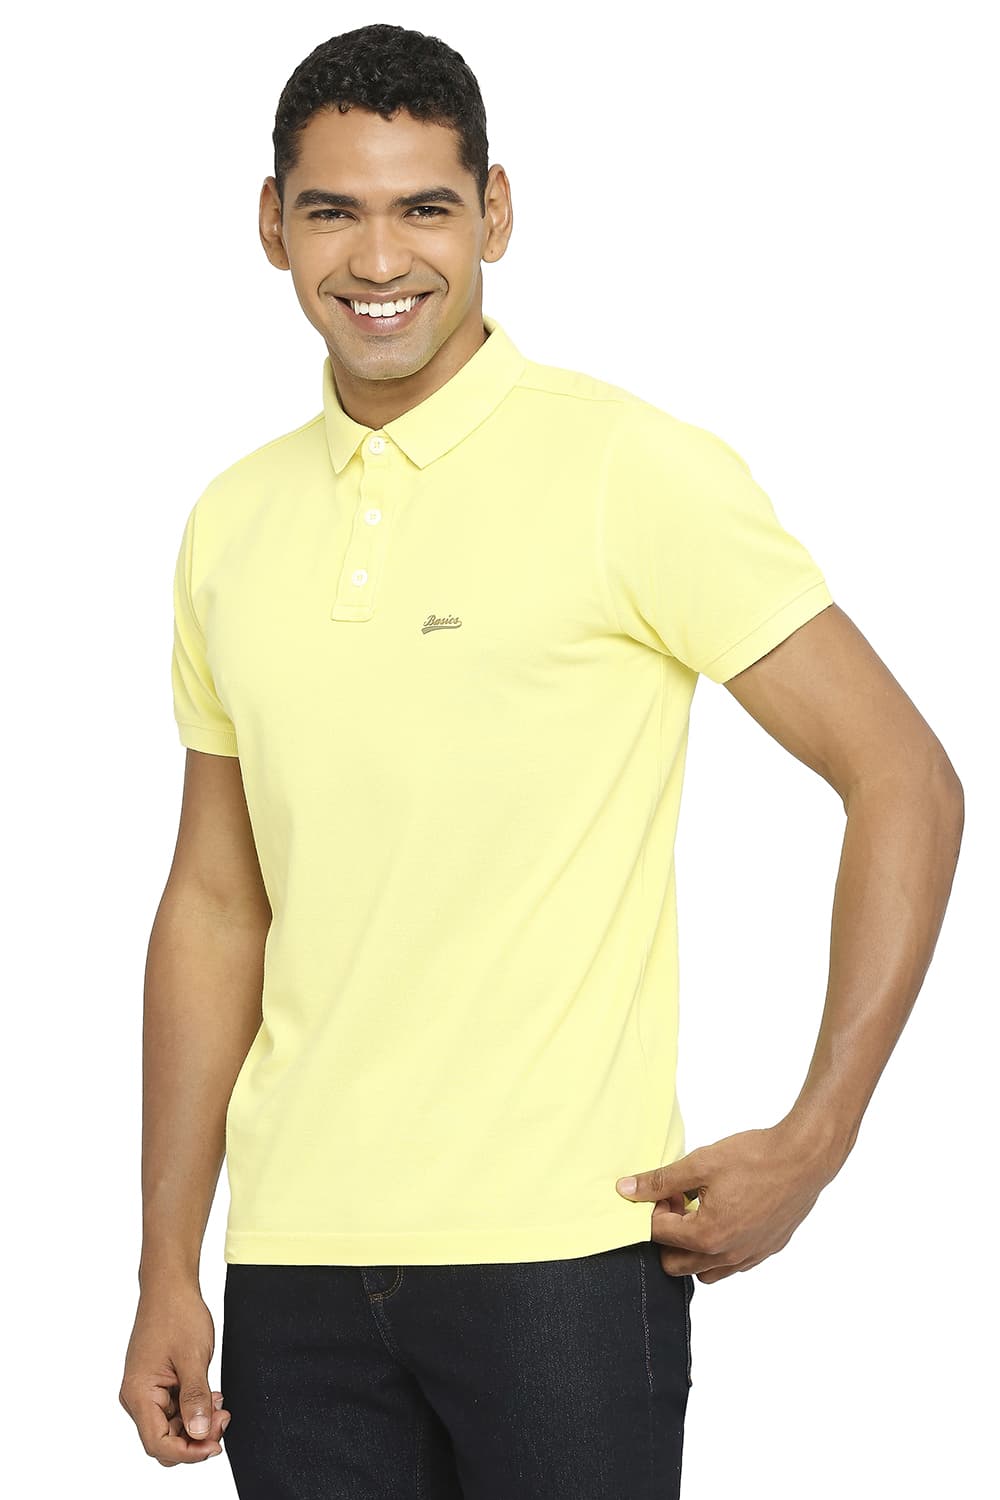 BASICS MUSCLE FIT POLO T-SHIRT